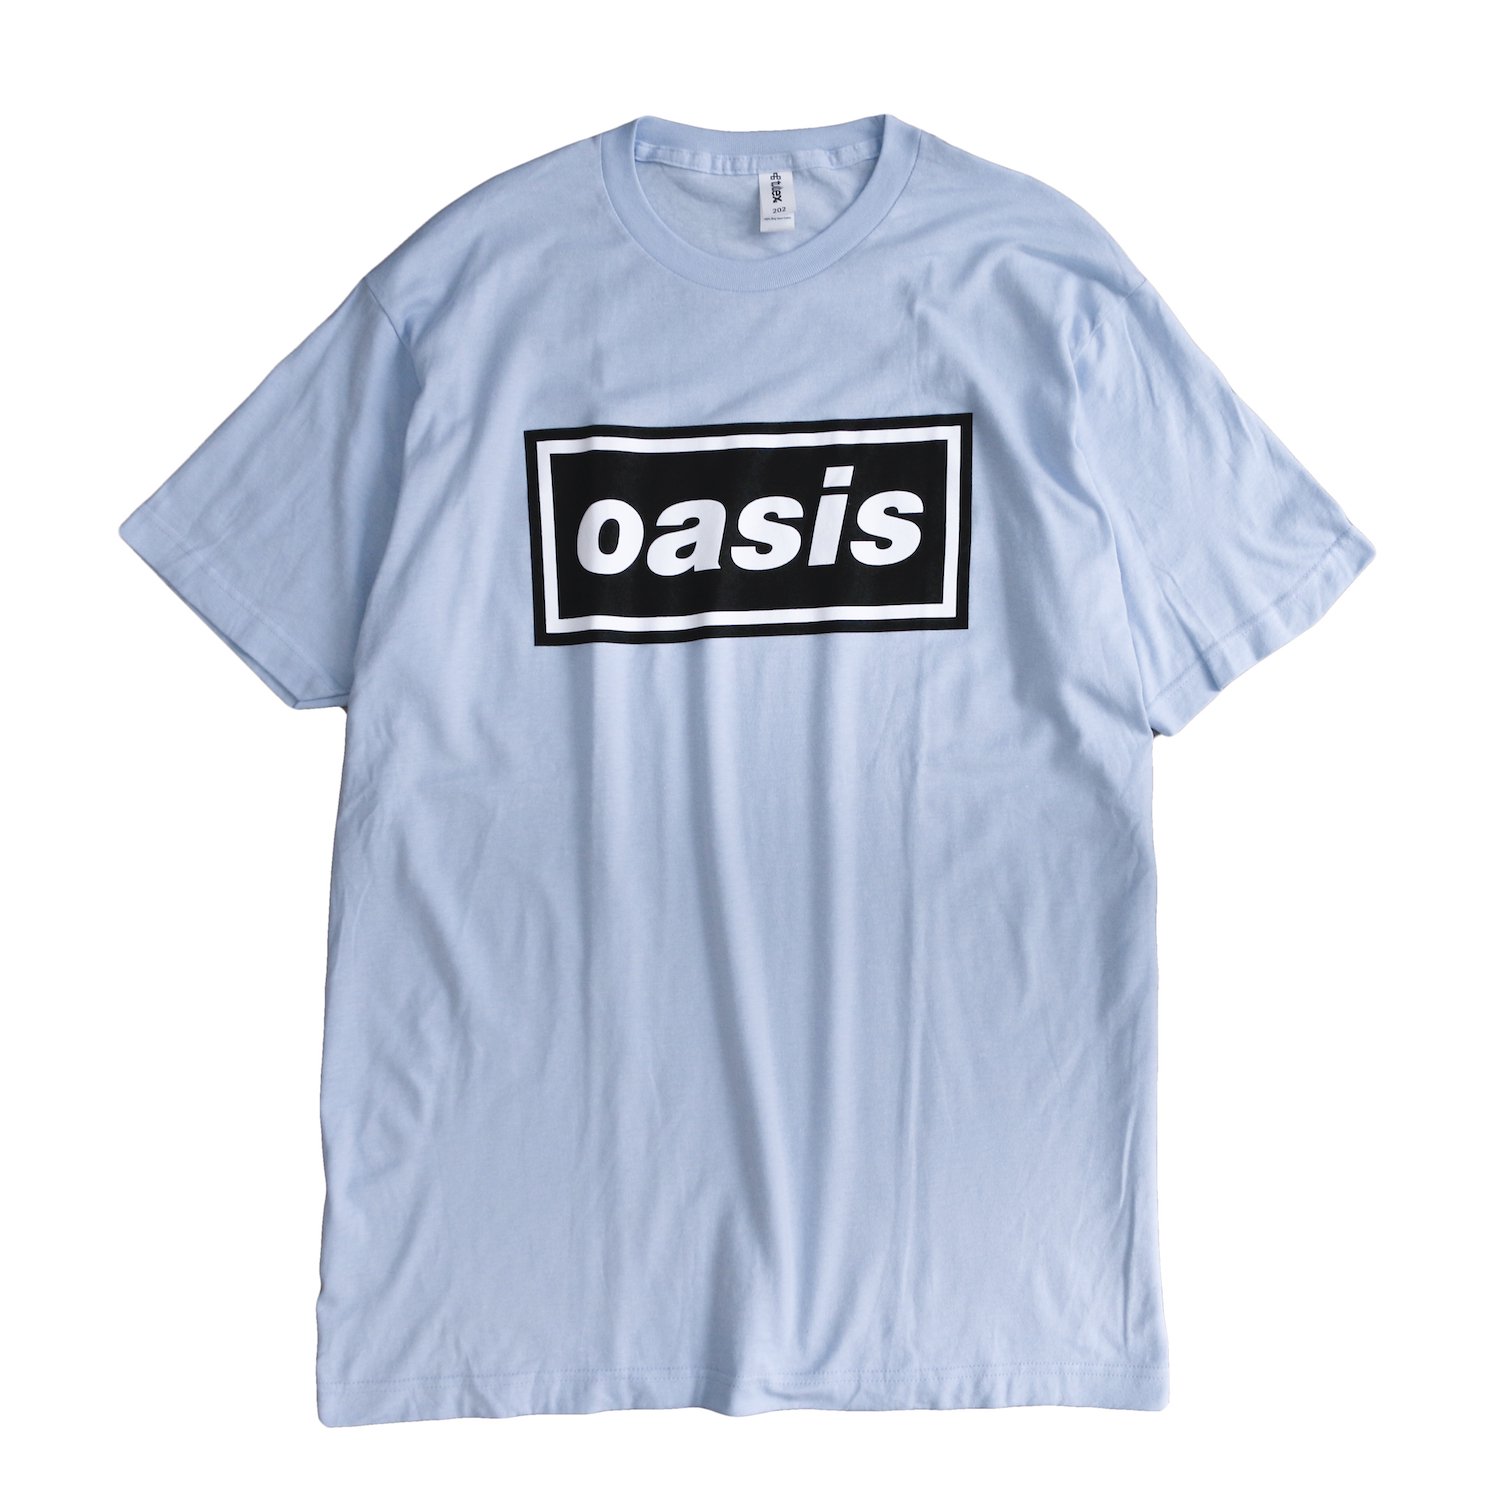 <img class='new_mark_img1' src='https://img.shop-pro.jp/img/new/icons8.gif' style='border:none;display:inline;margin:0px;padding:0px;width:auto;' /> Music Tee / S/S OASIS 